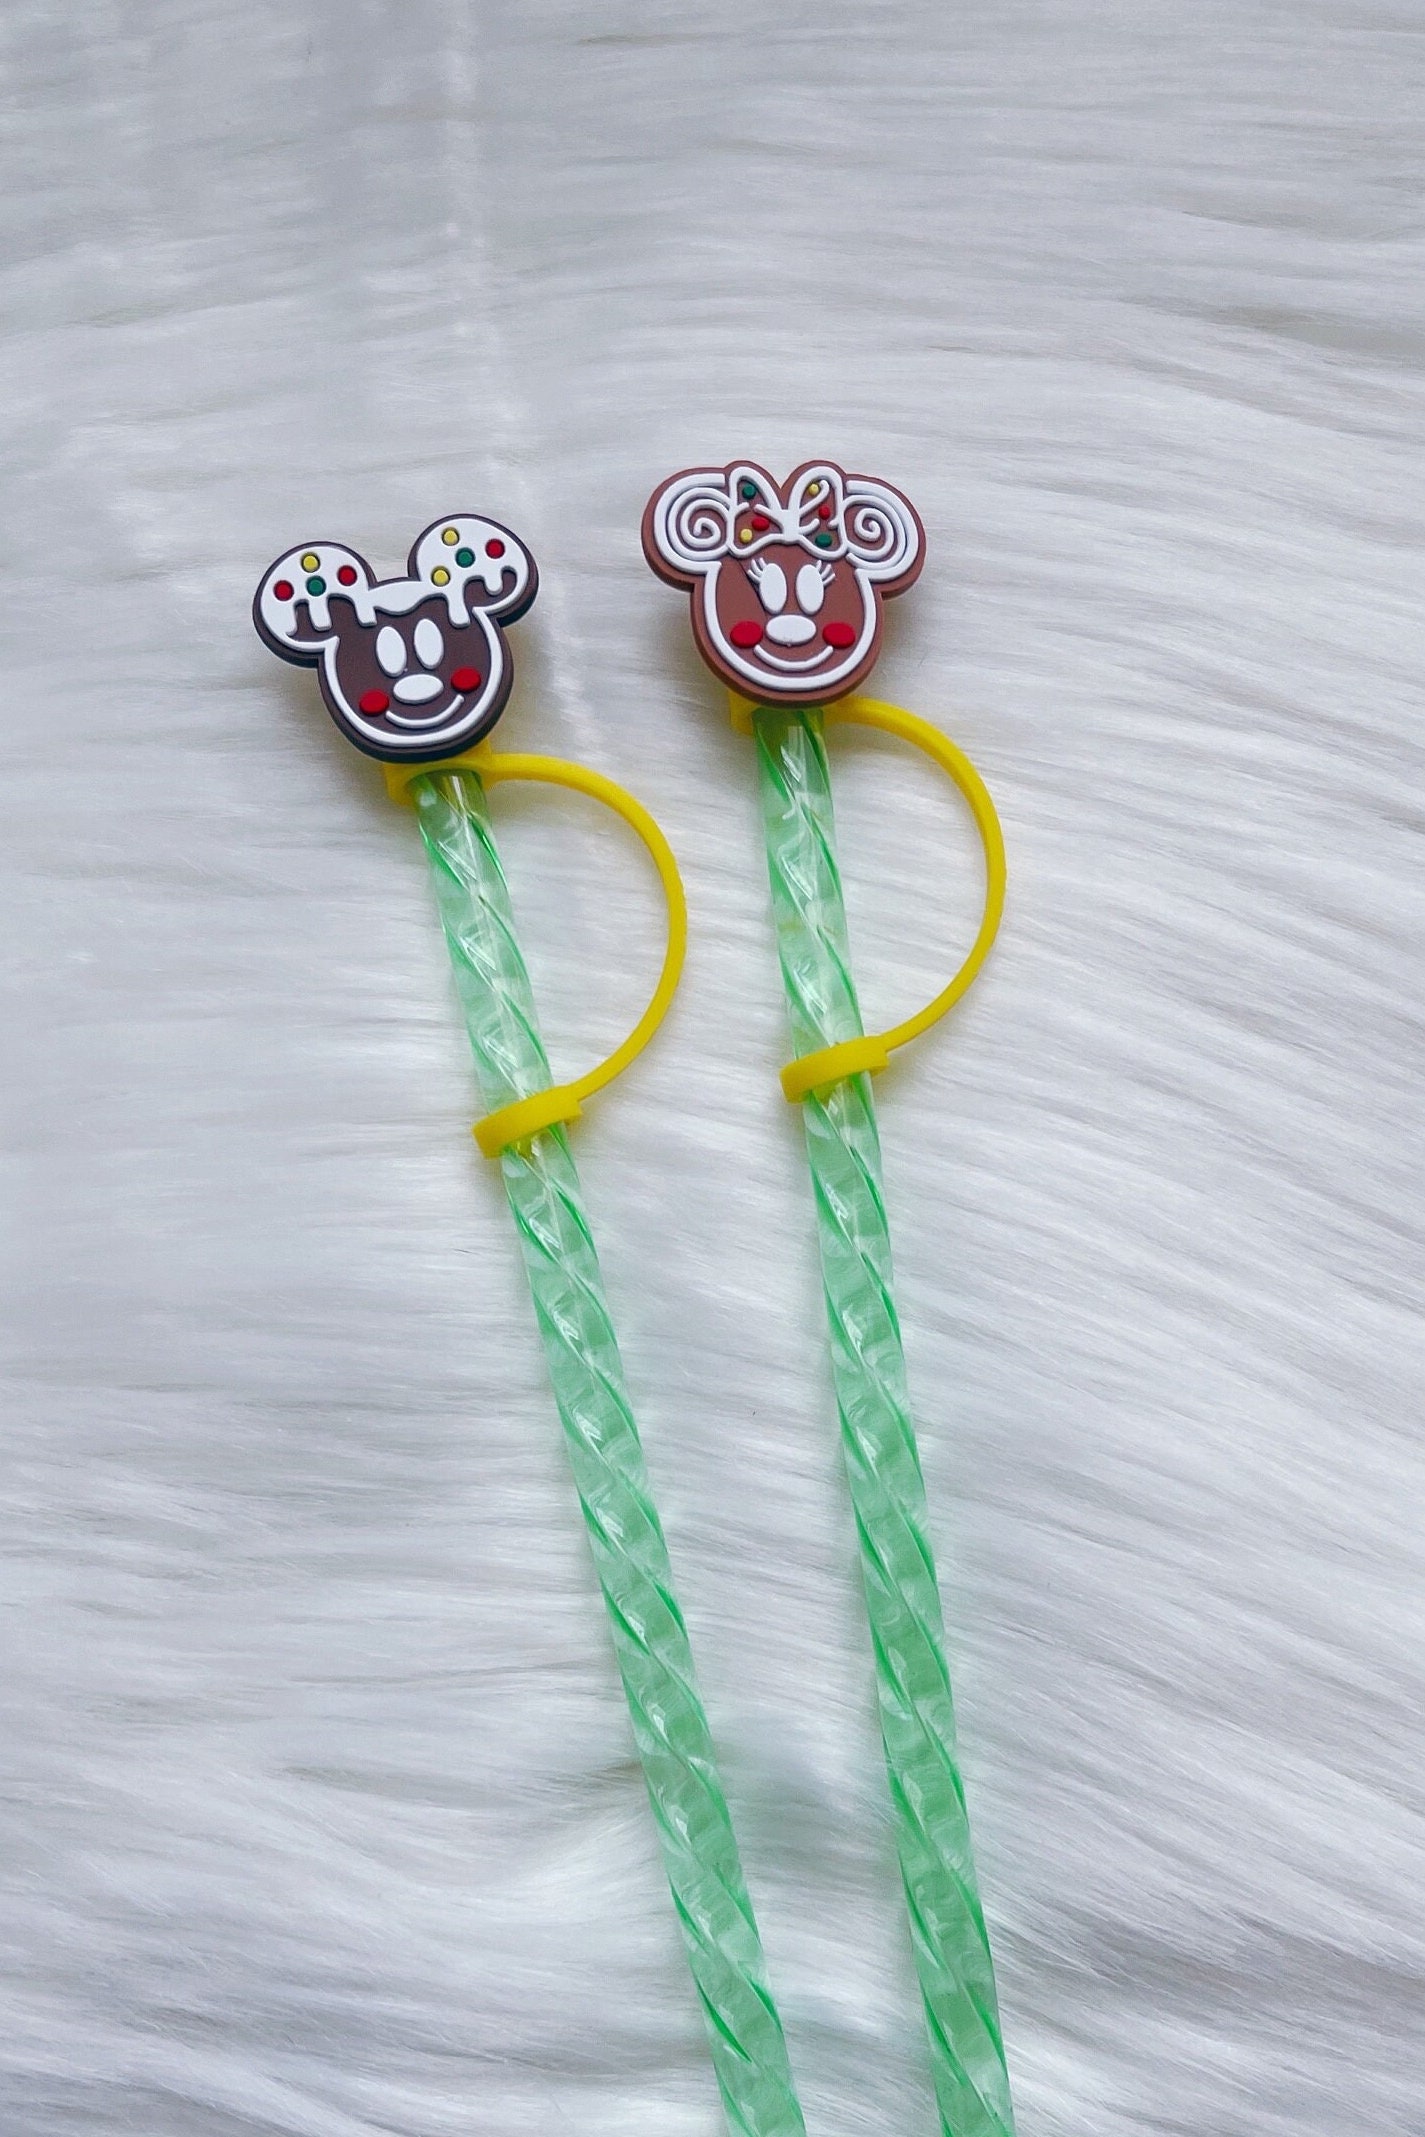 Stitch Straw Toppers, Straw Accessories, Straw Charms | Works With Stanley  Cups | Stitch Mickey Mouse, Experiment 626, Lilo and Stitch